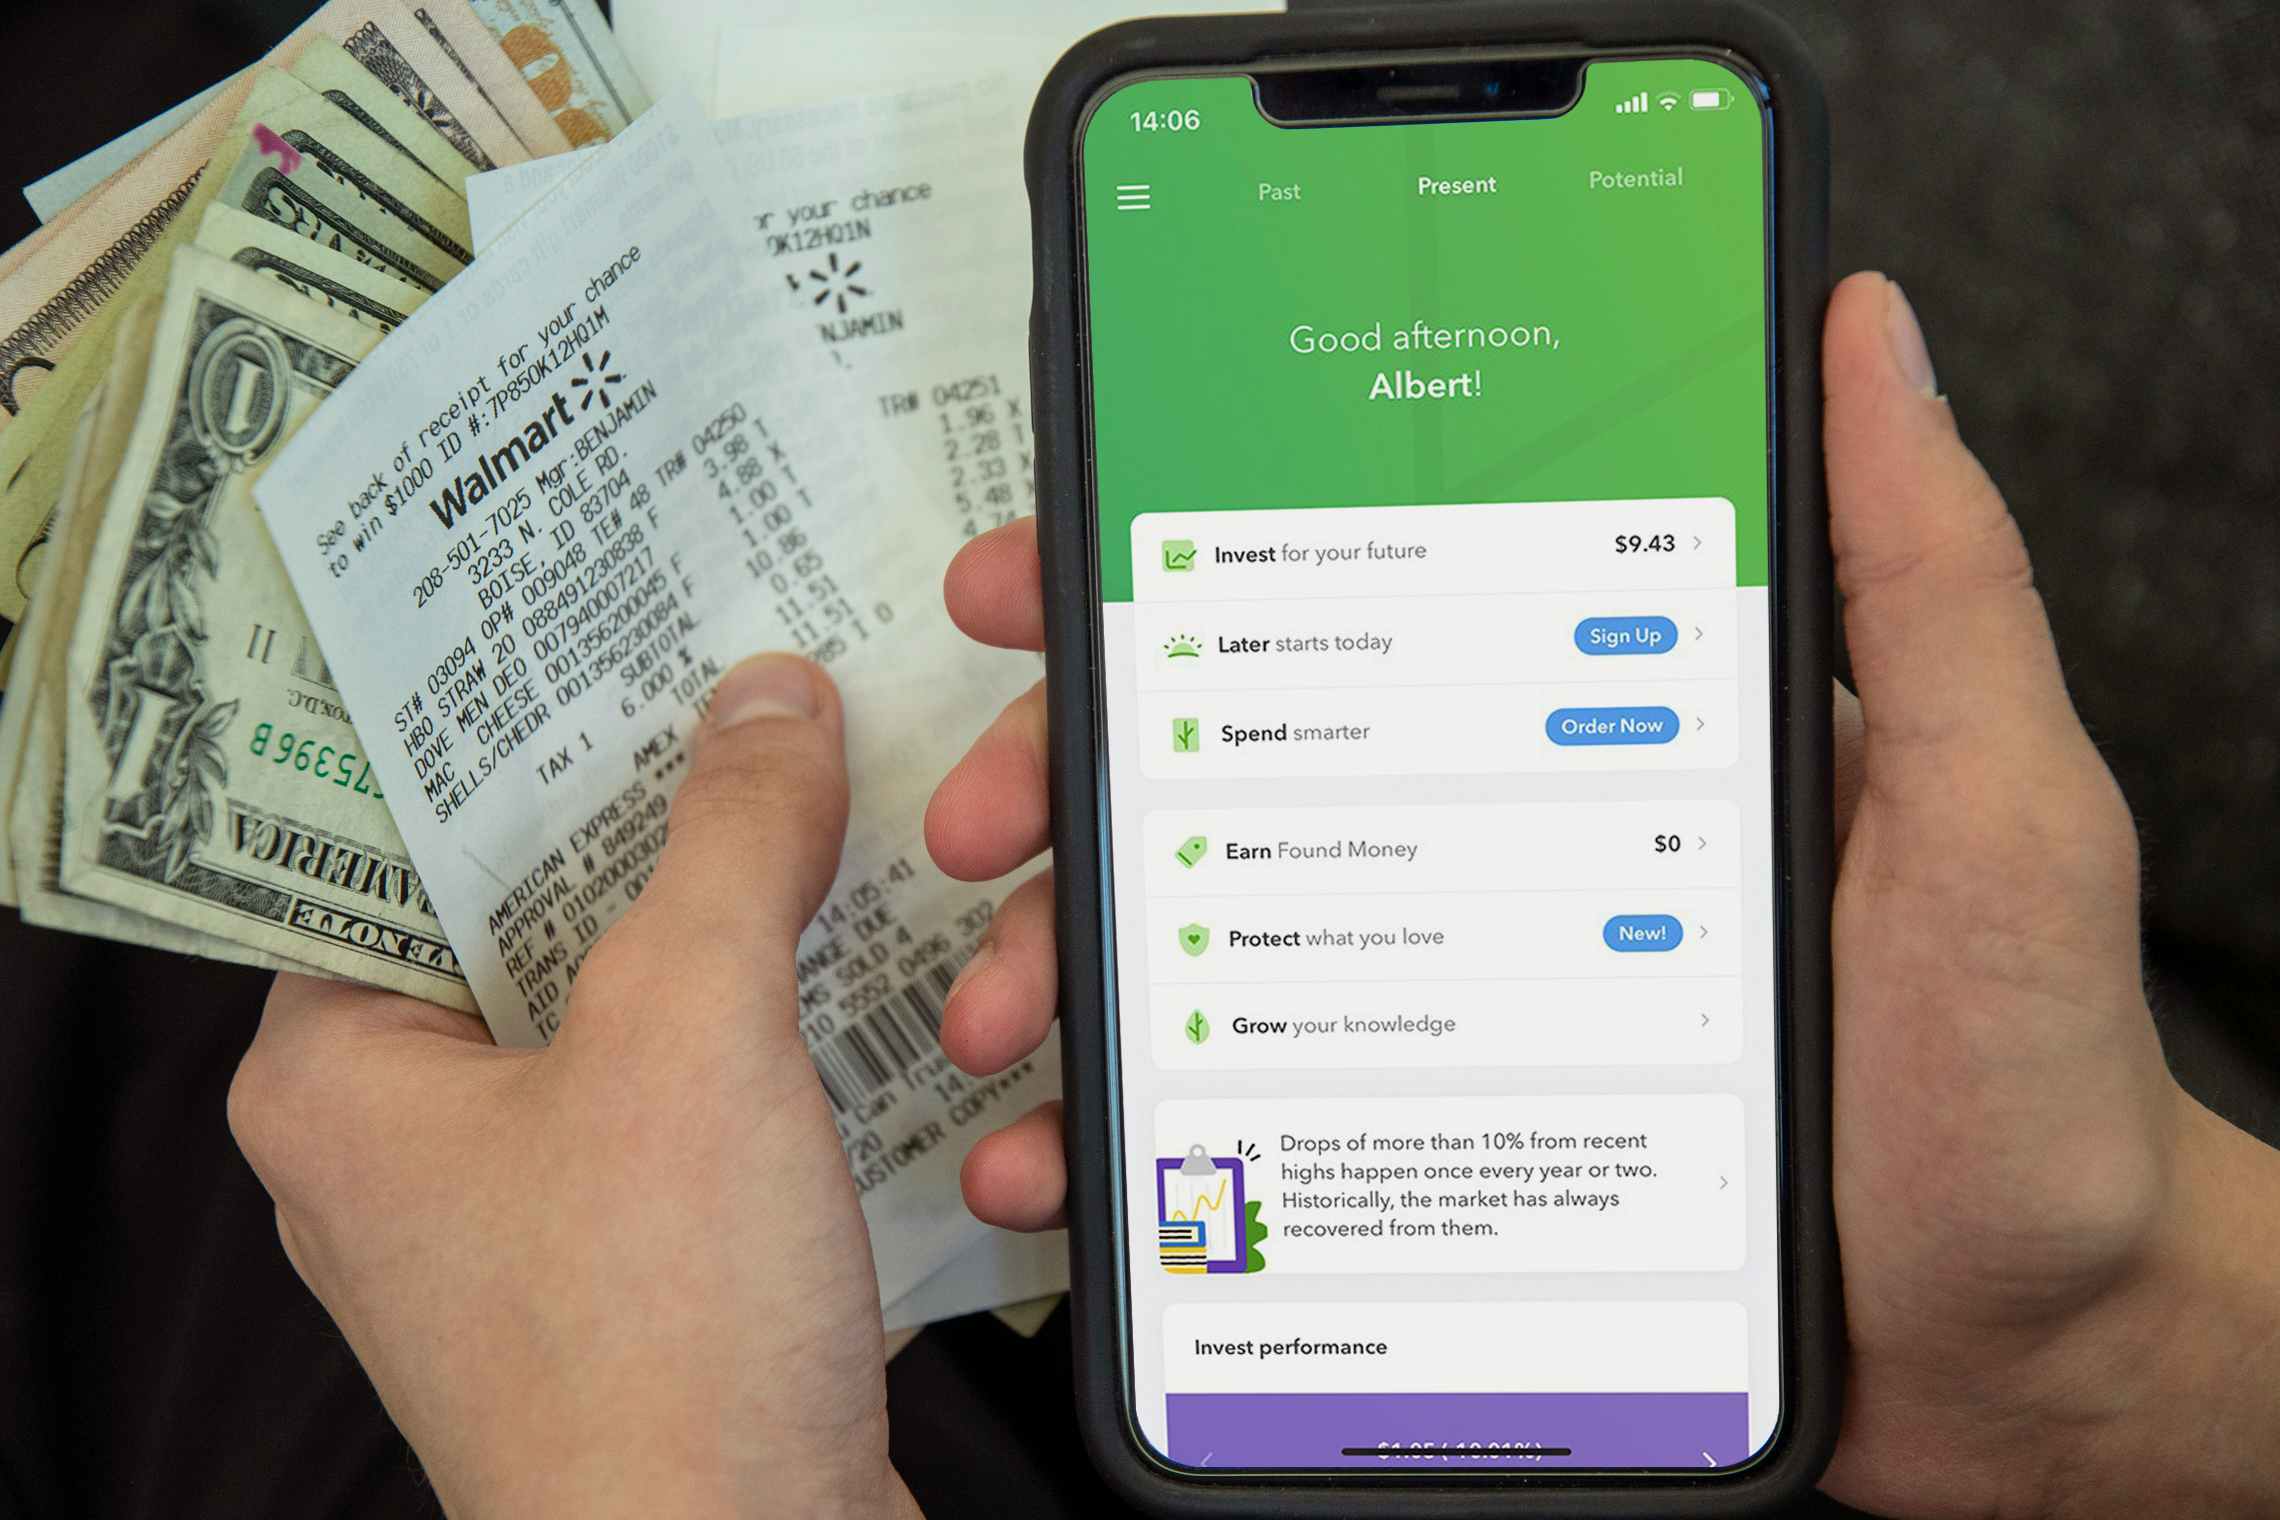 A person holding cash and receipts next to a cell phone displaying the Acorns app.